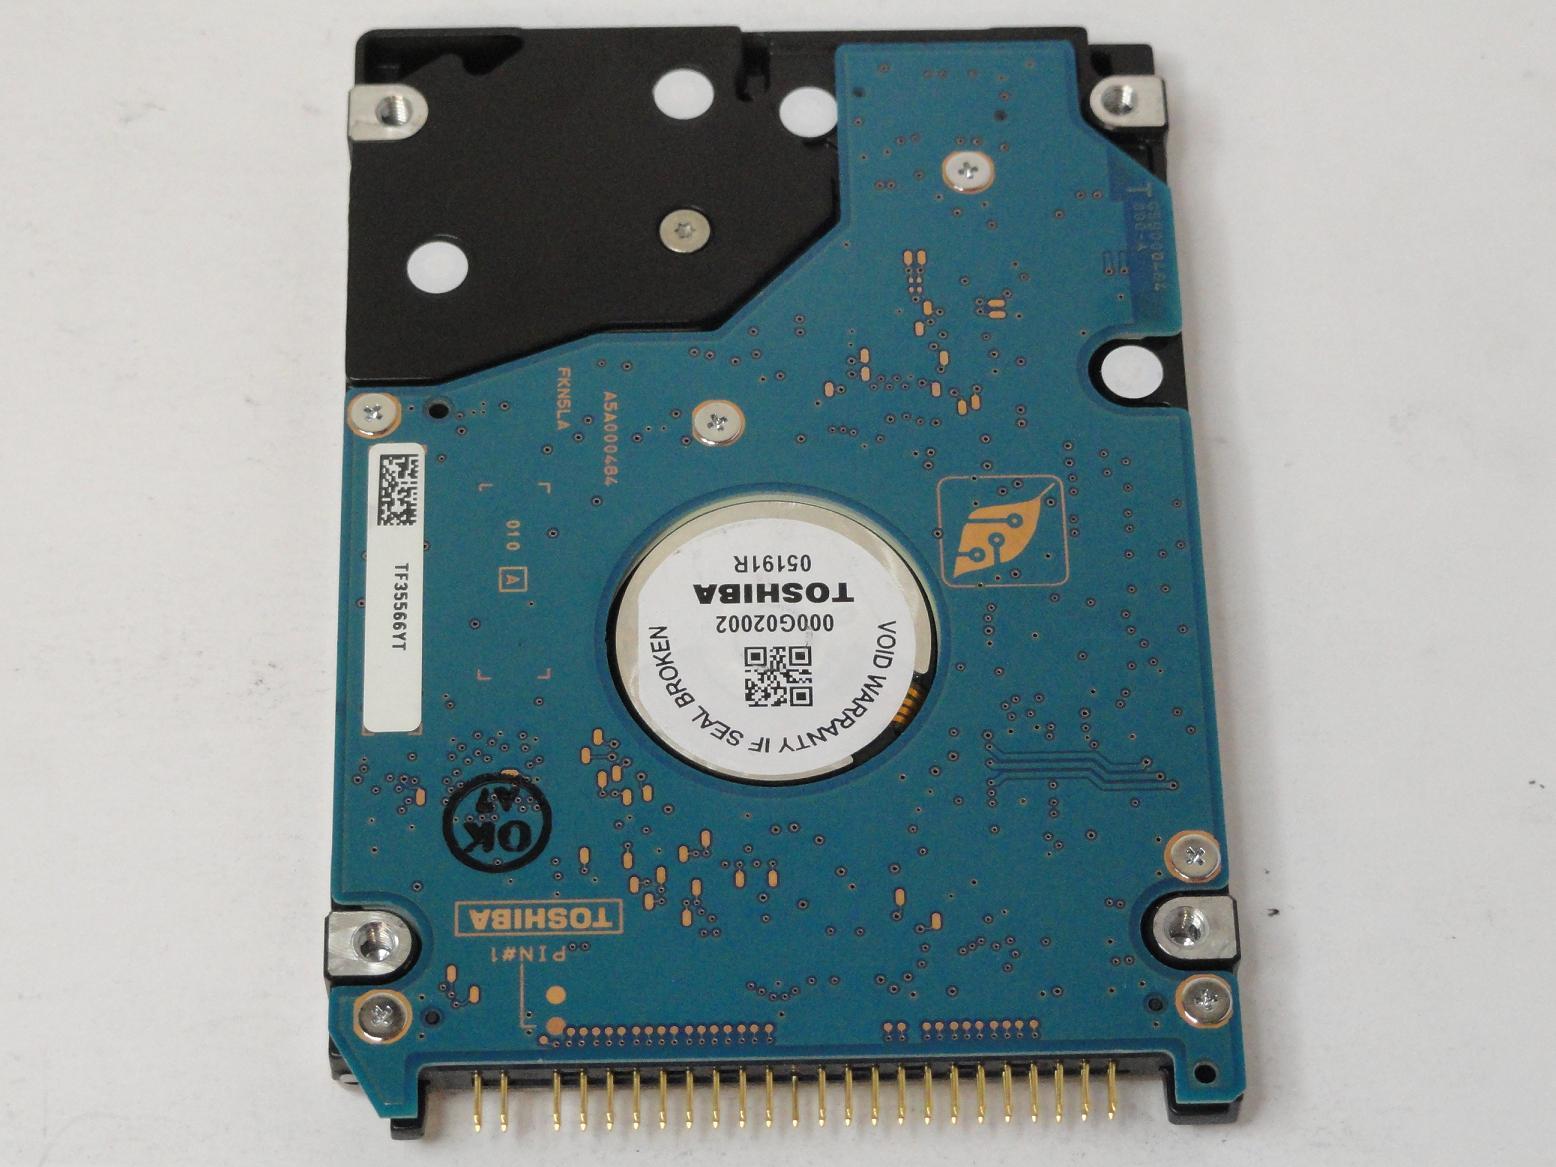 PR14905_HDD2187_Toshiba HP 20GB IDE 4200rpm 2.5in HDD - Image3